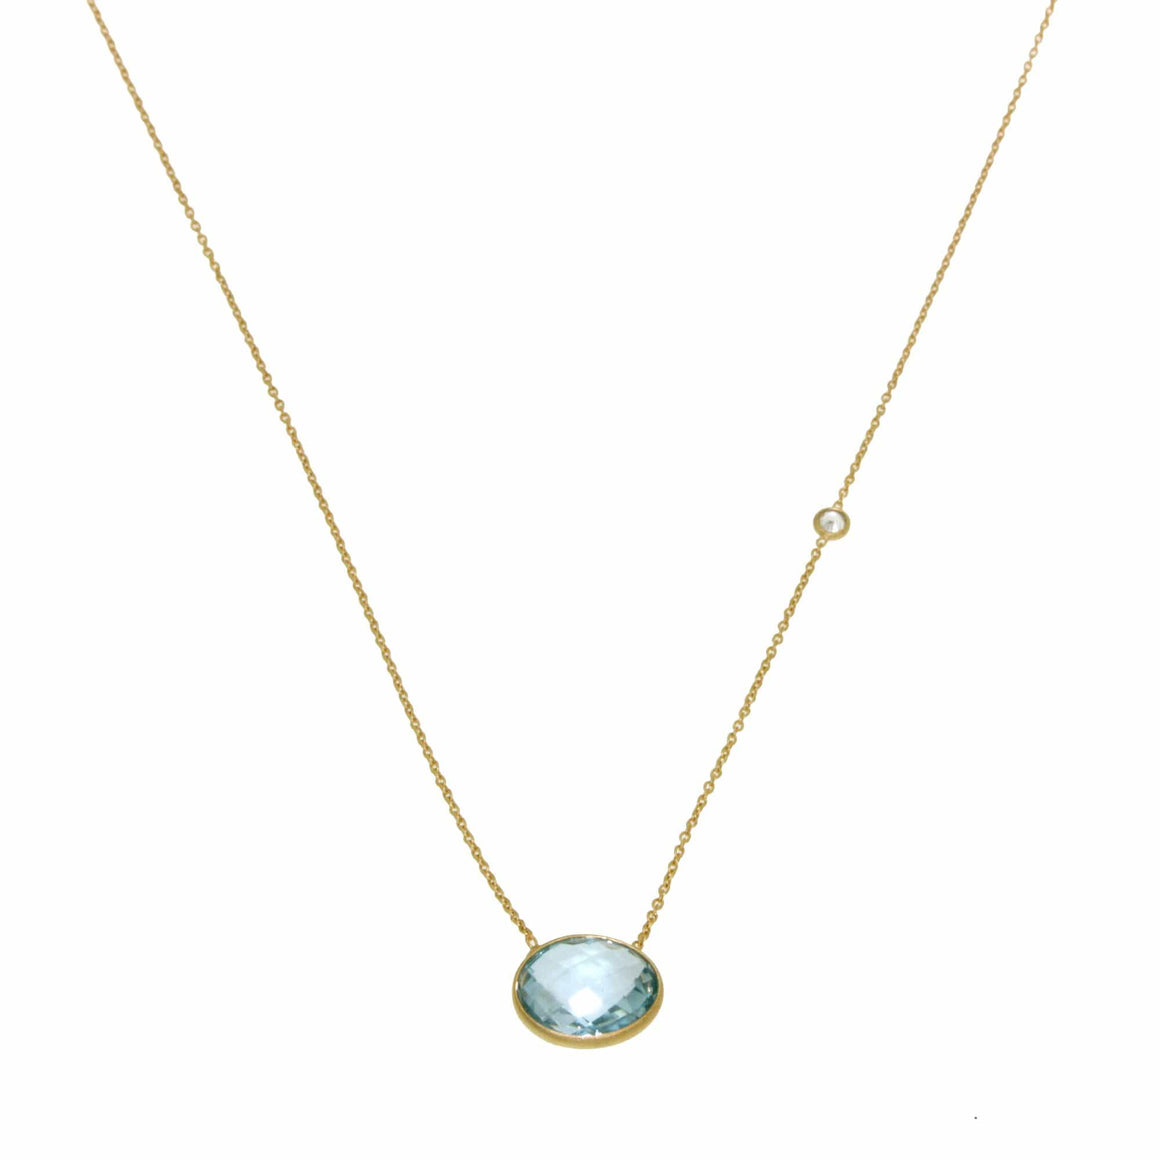 Manjusha Jewels Necklaces Ocean Classic Necklace in Blue Topaz and White Topaz